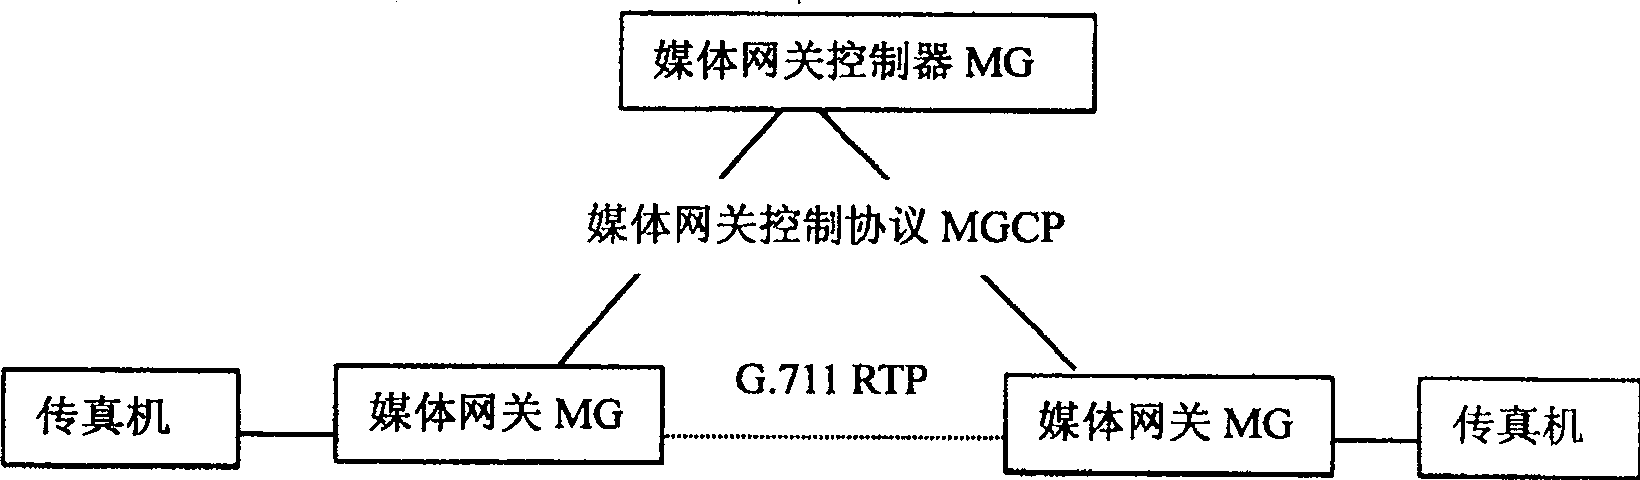 Call processing method in next generation network